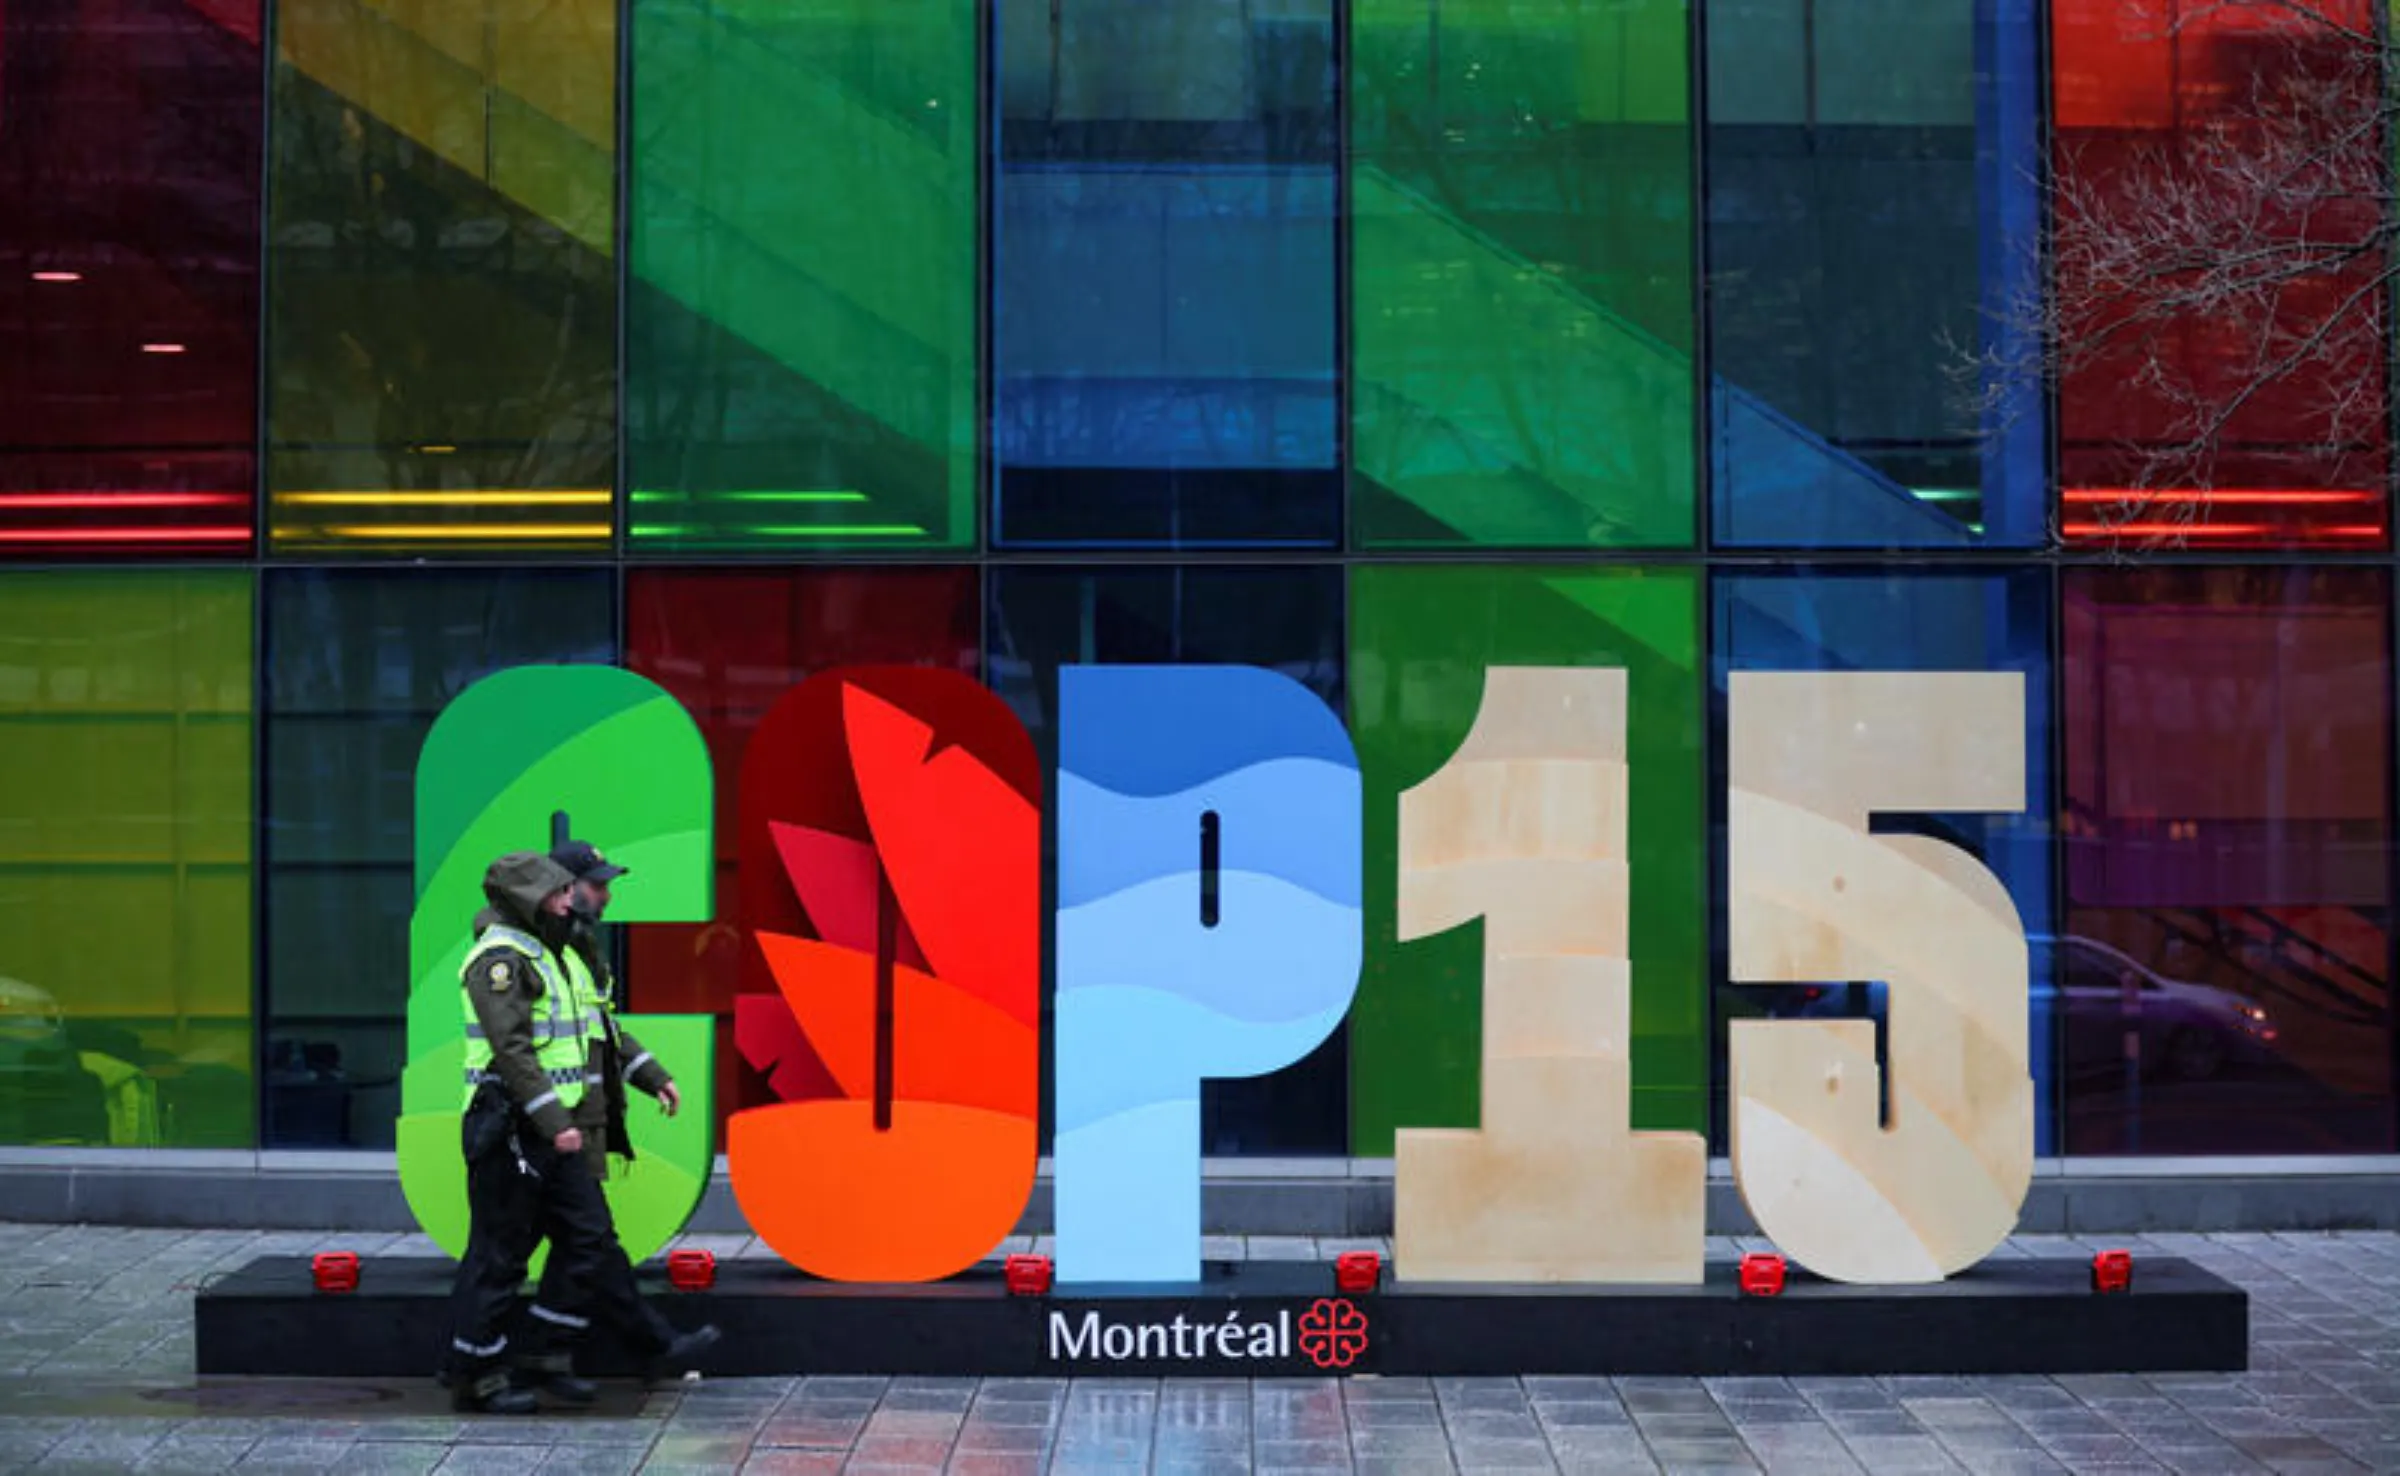 Police officers walk past a sign as they patrol outside the Palais de Congres, during the opening of COP15, the two-week U.N. biodiversity summit in Montreal, Quebec, Canada, December 6, 2022. REUTERS/Christinne Muschi 